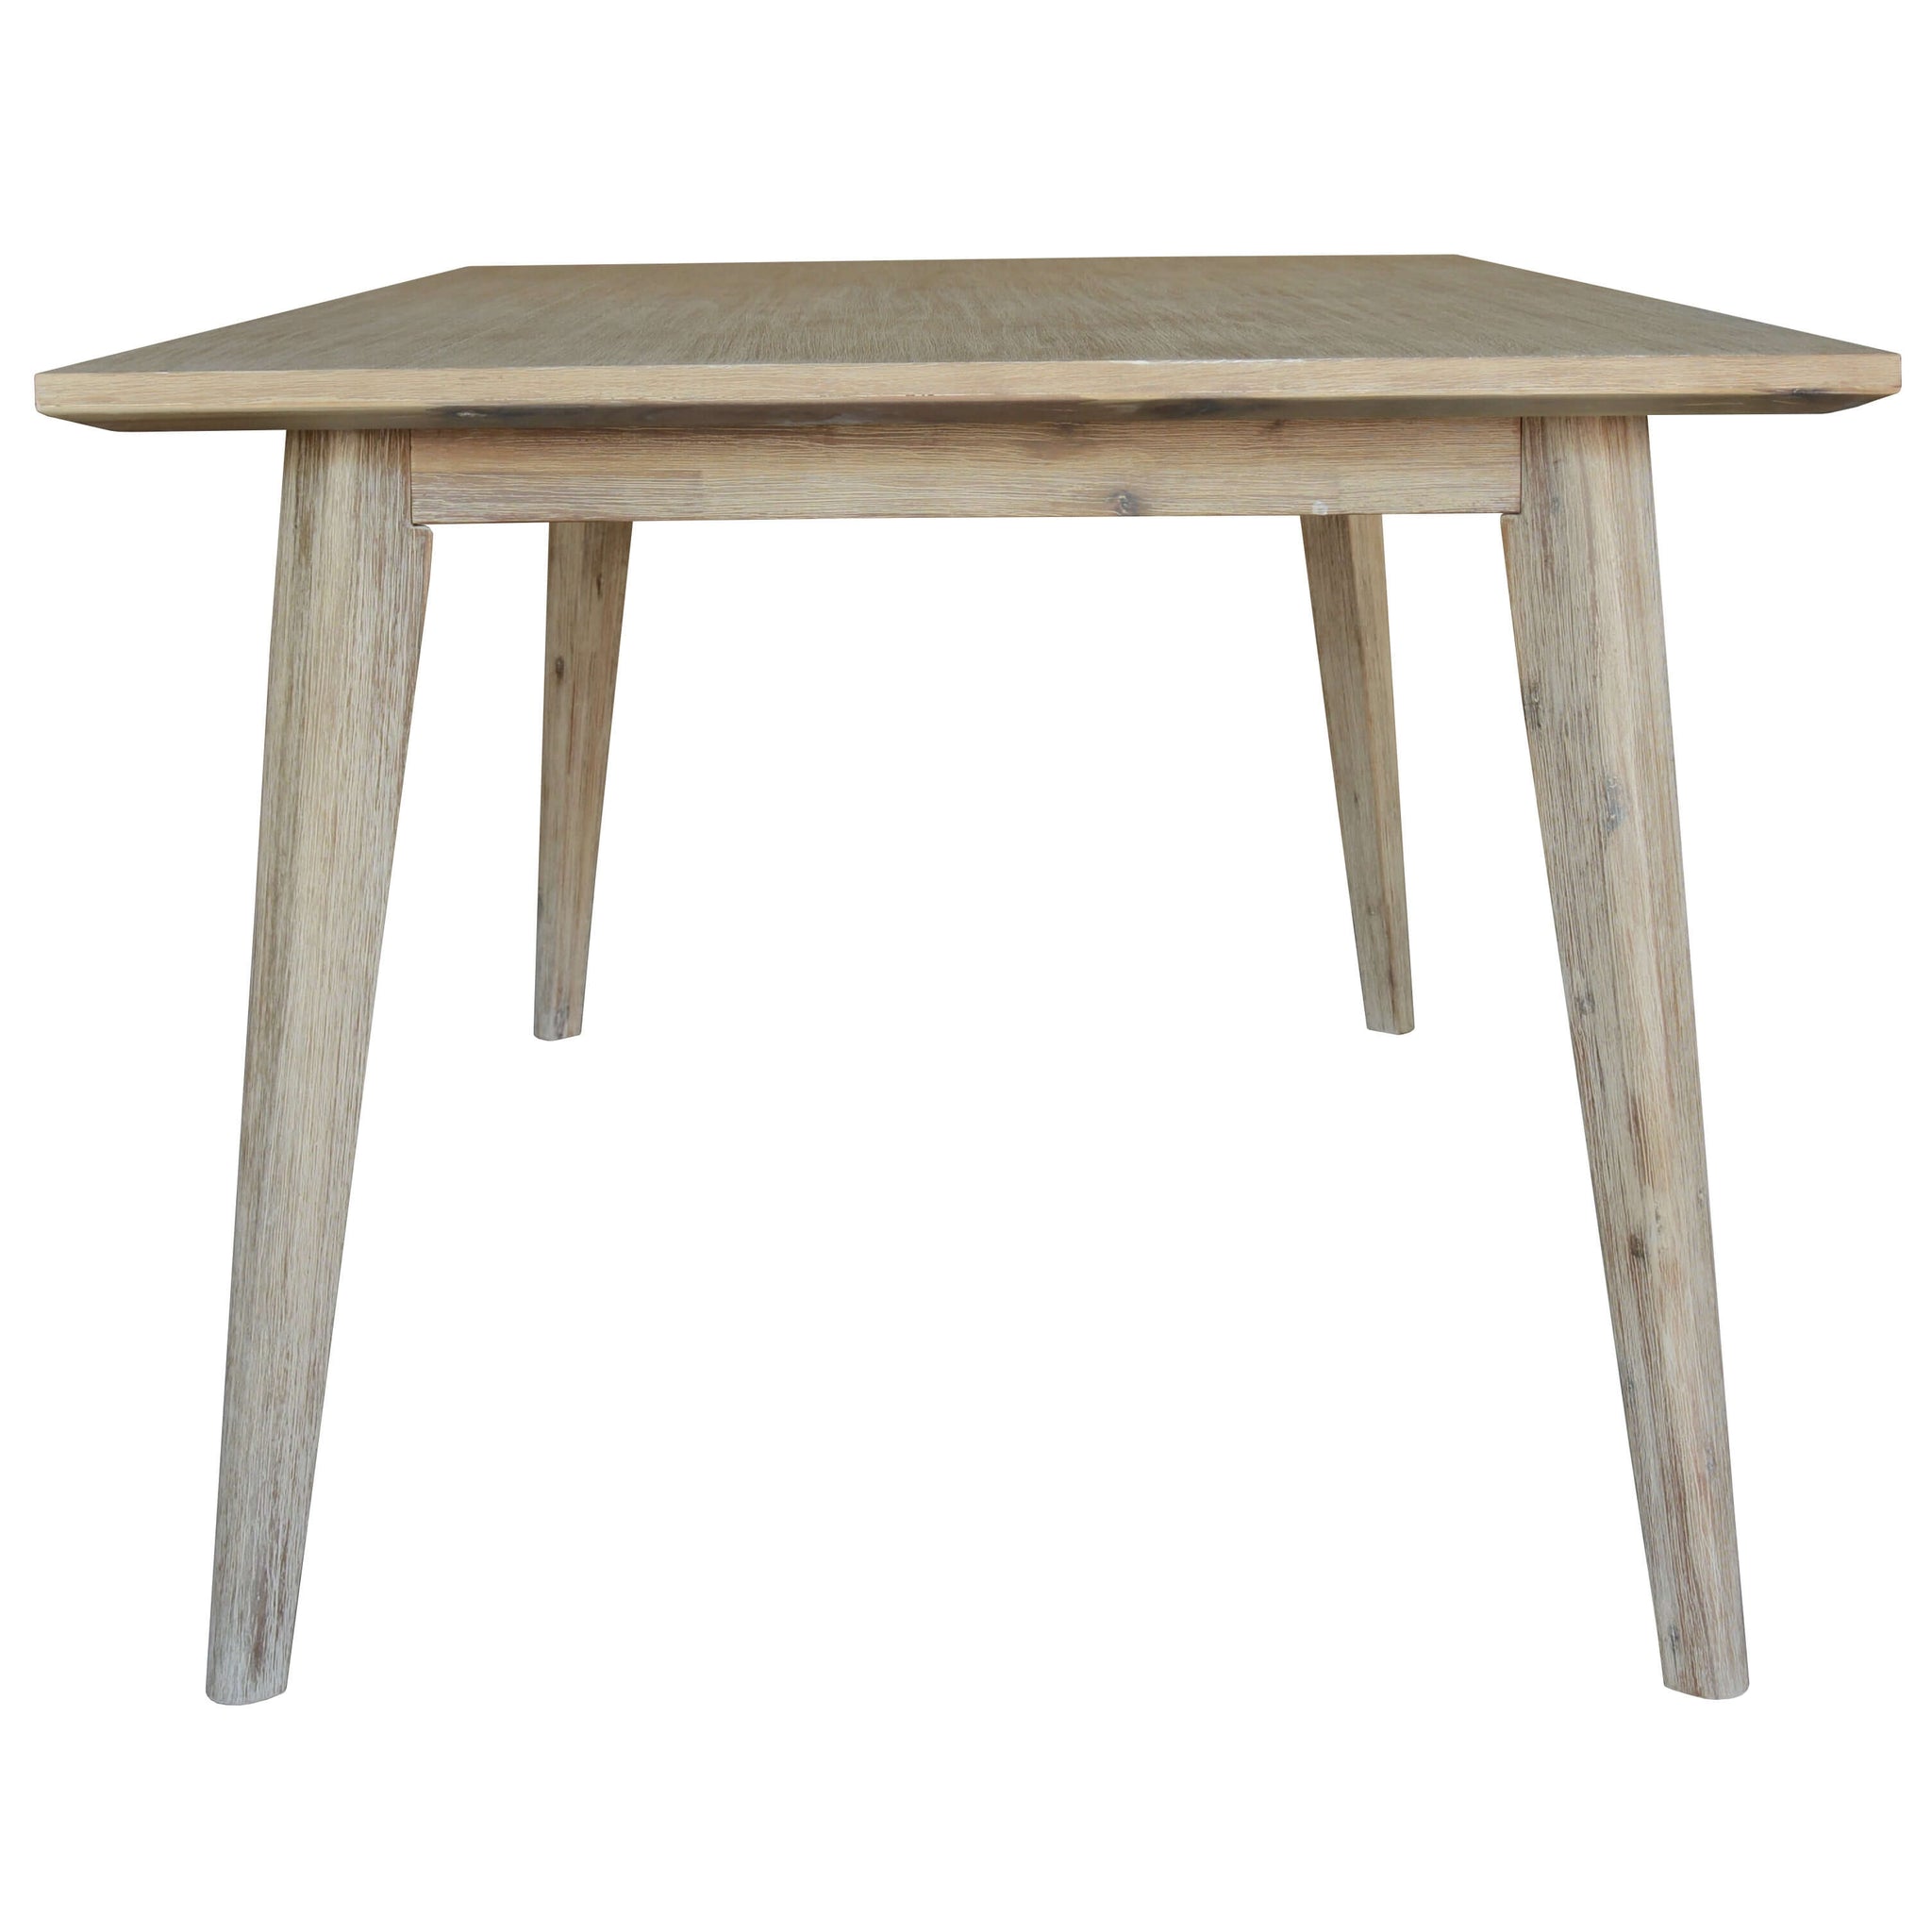 Grevillea Dining Table 180cm Solid Acacia Timber Wood Tropical Furniture - Brown-Upinteriors